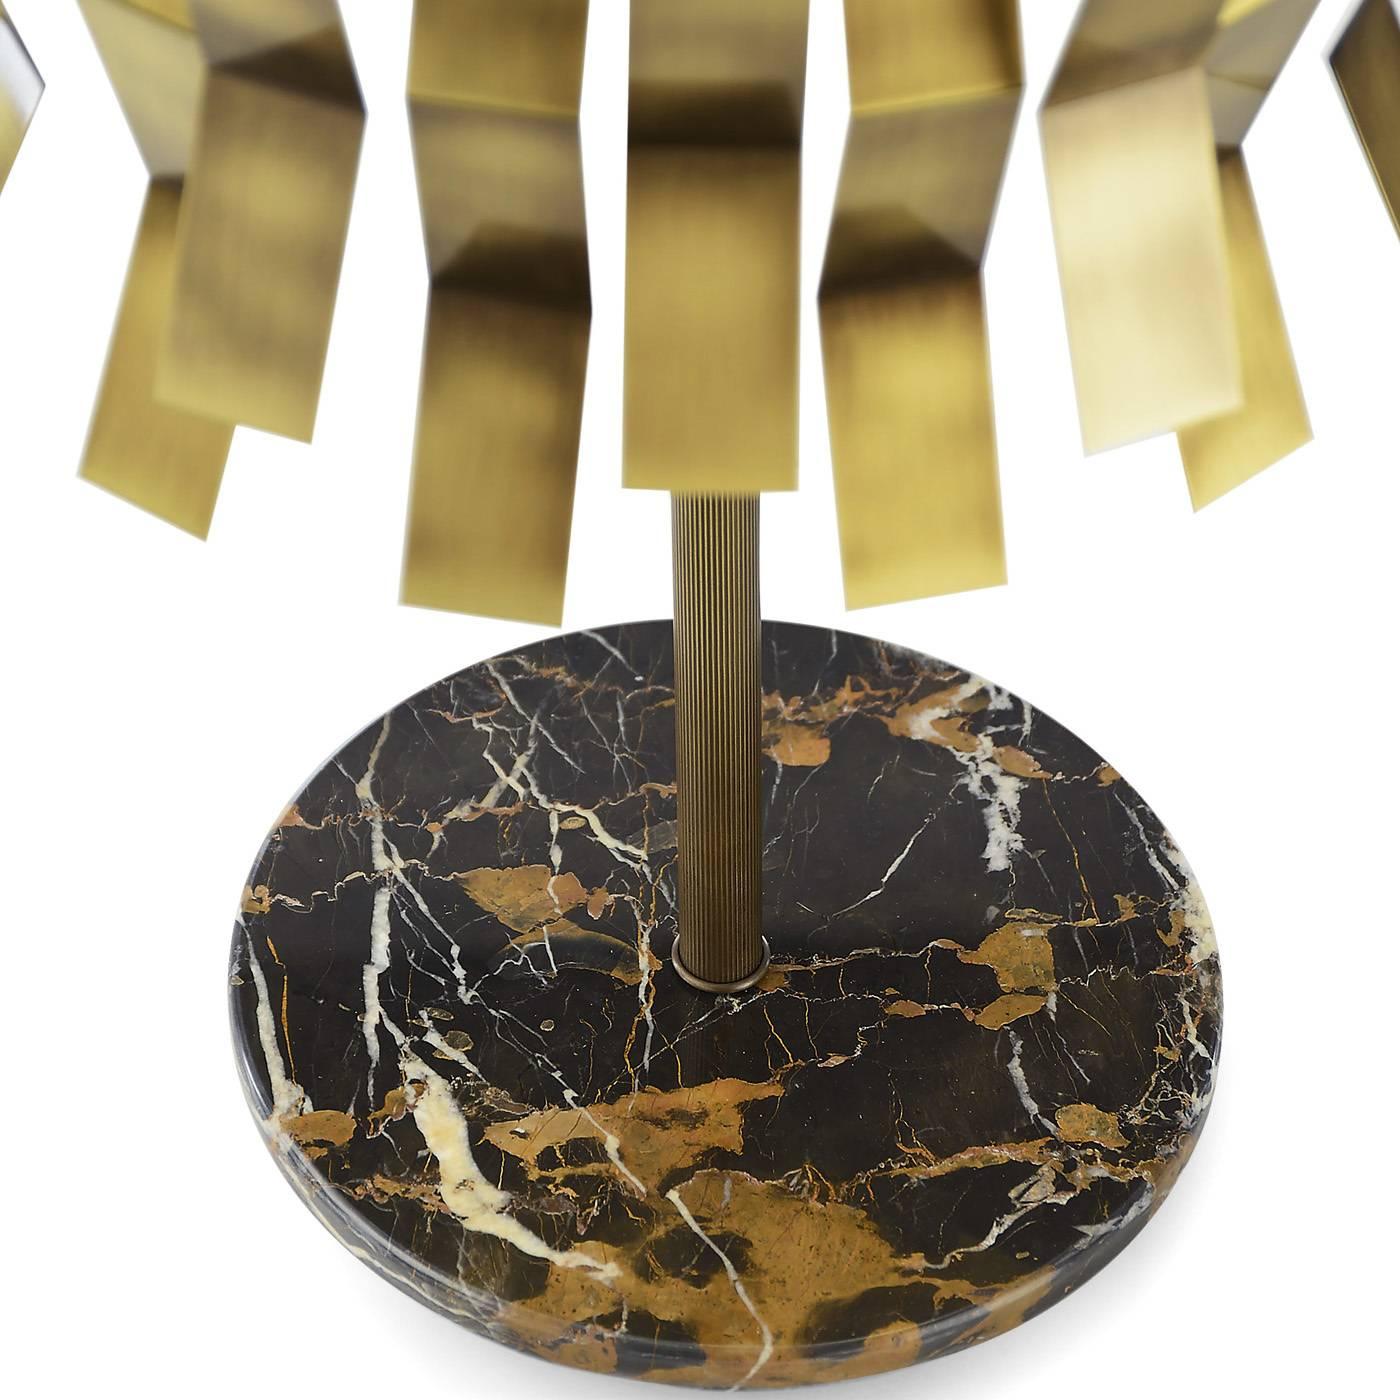 This striking brass sconce, designed by Studio 63 for Marioni, is decorated with geometrical metal accents that run all around its round perimeter and LED strip lighting. The base is an exquisite Saint Laurent marble ring.